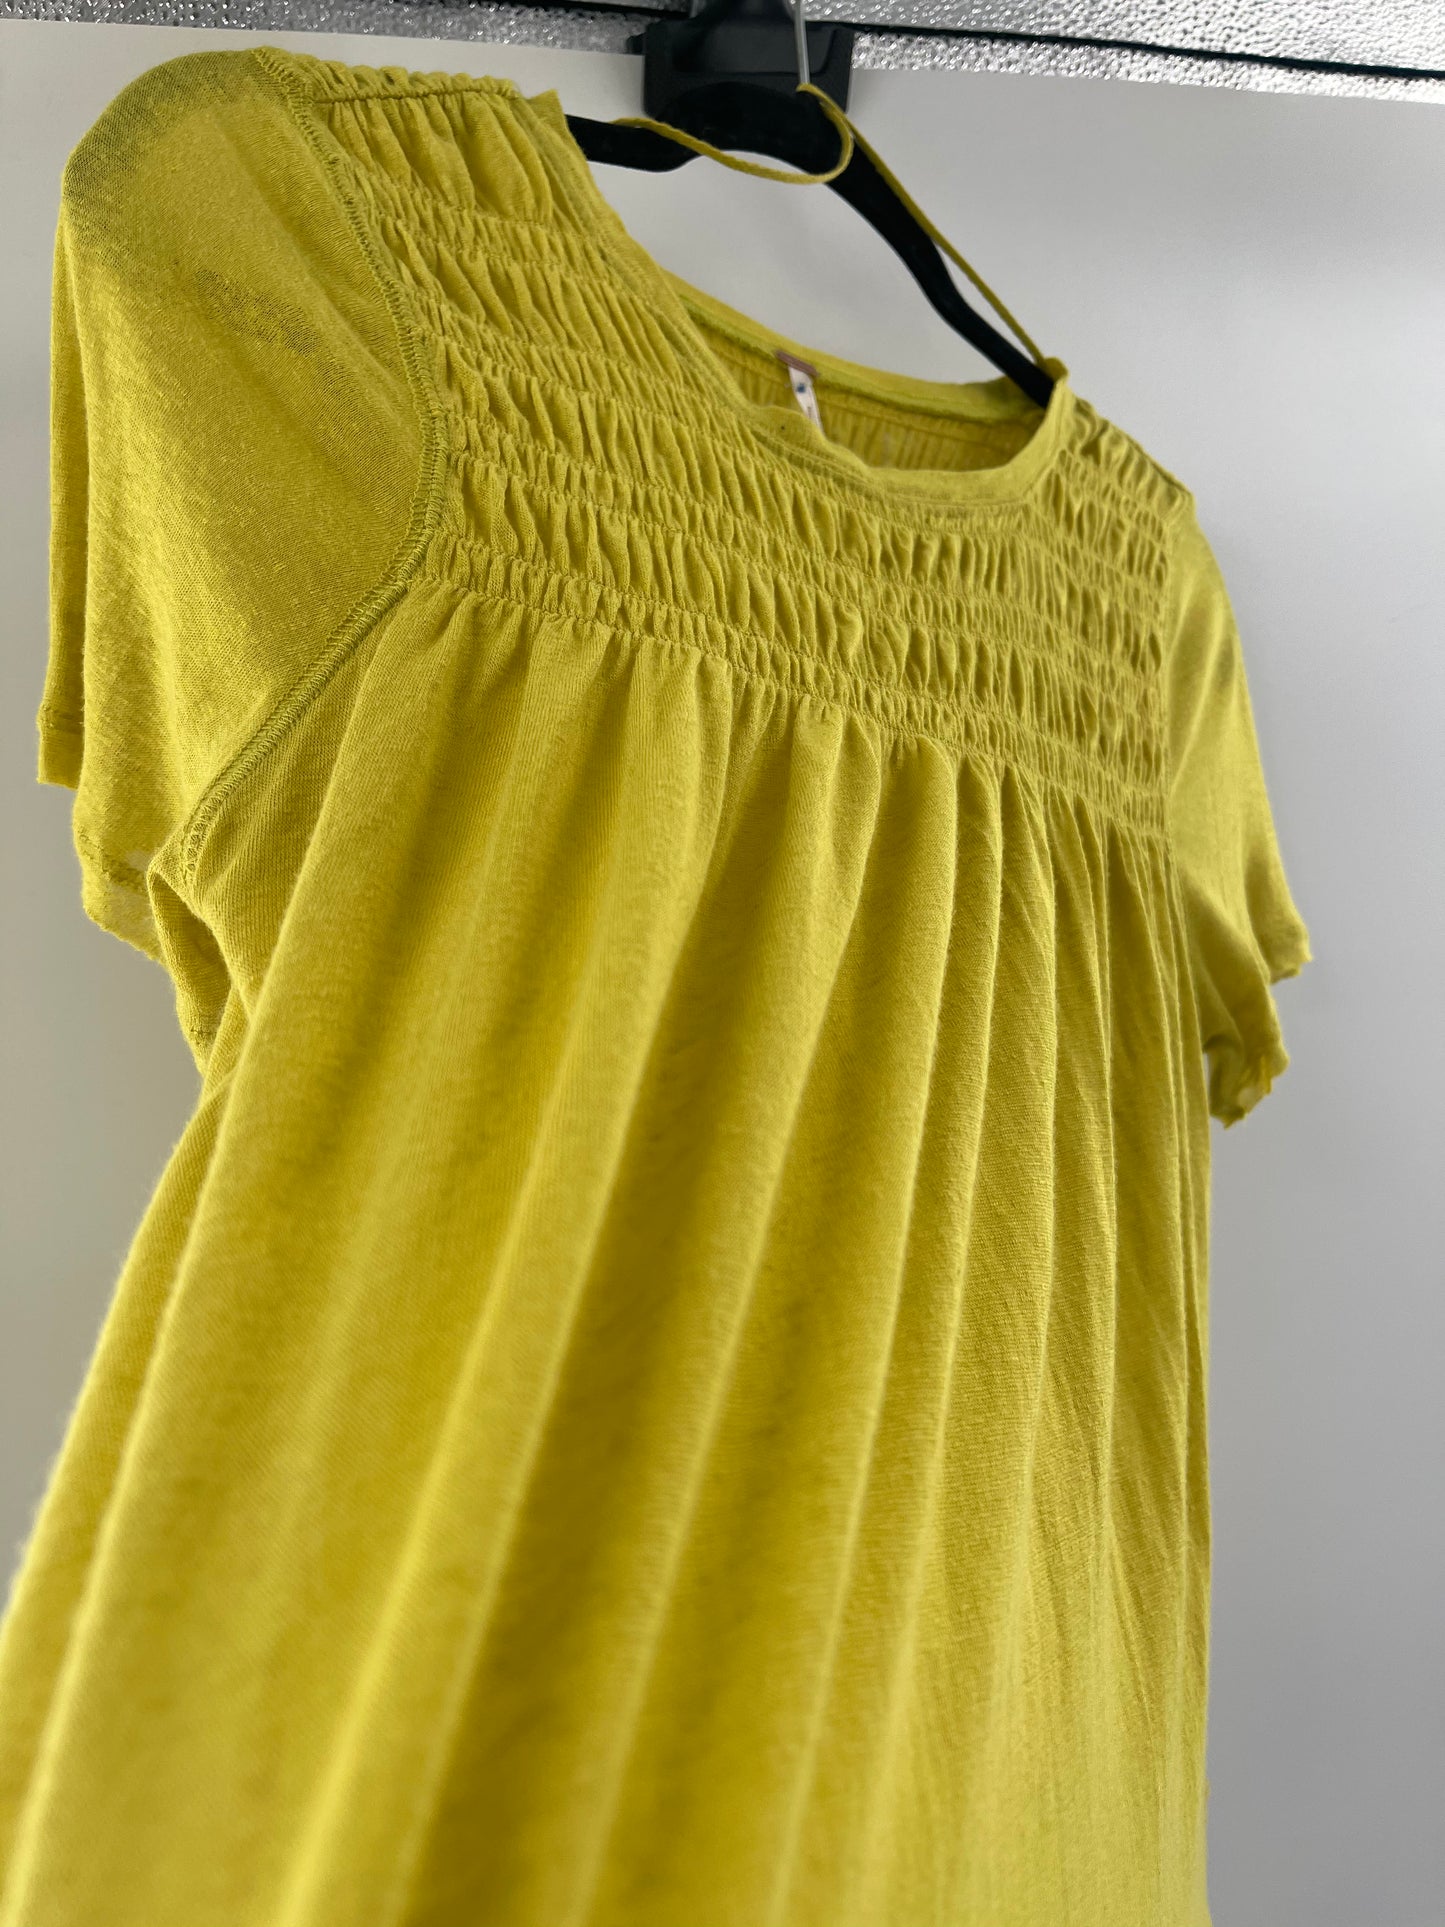 Free People Chartreuse Yellow Short Sleeve (XS)